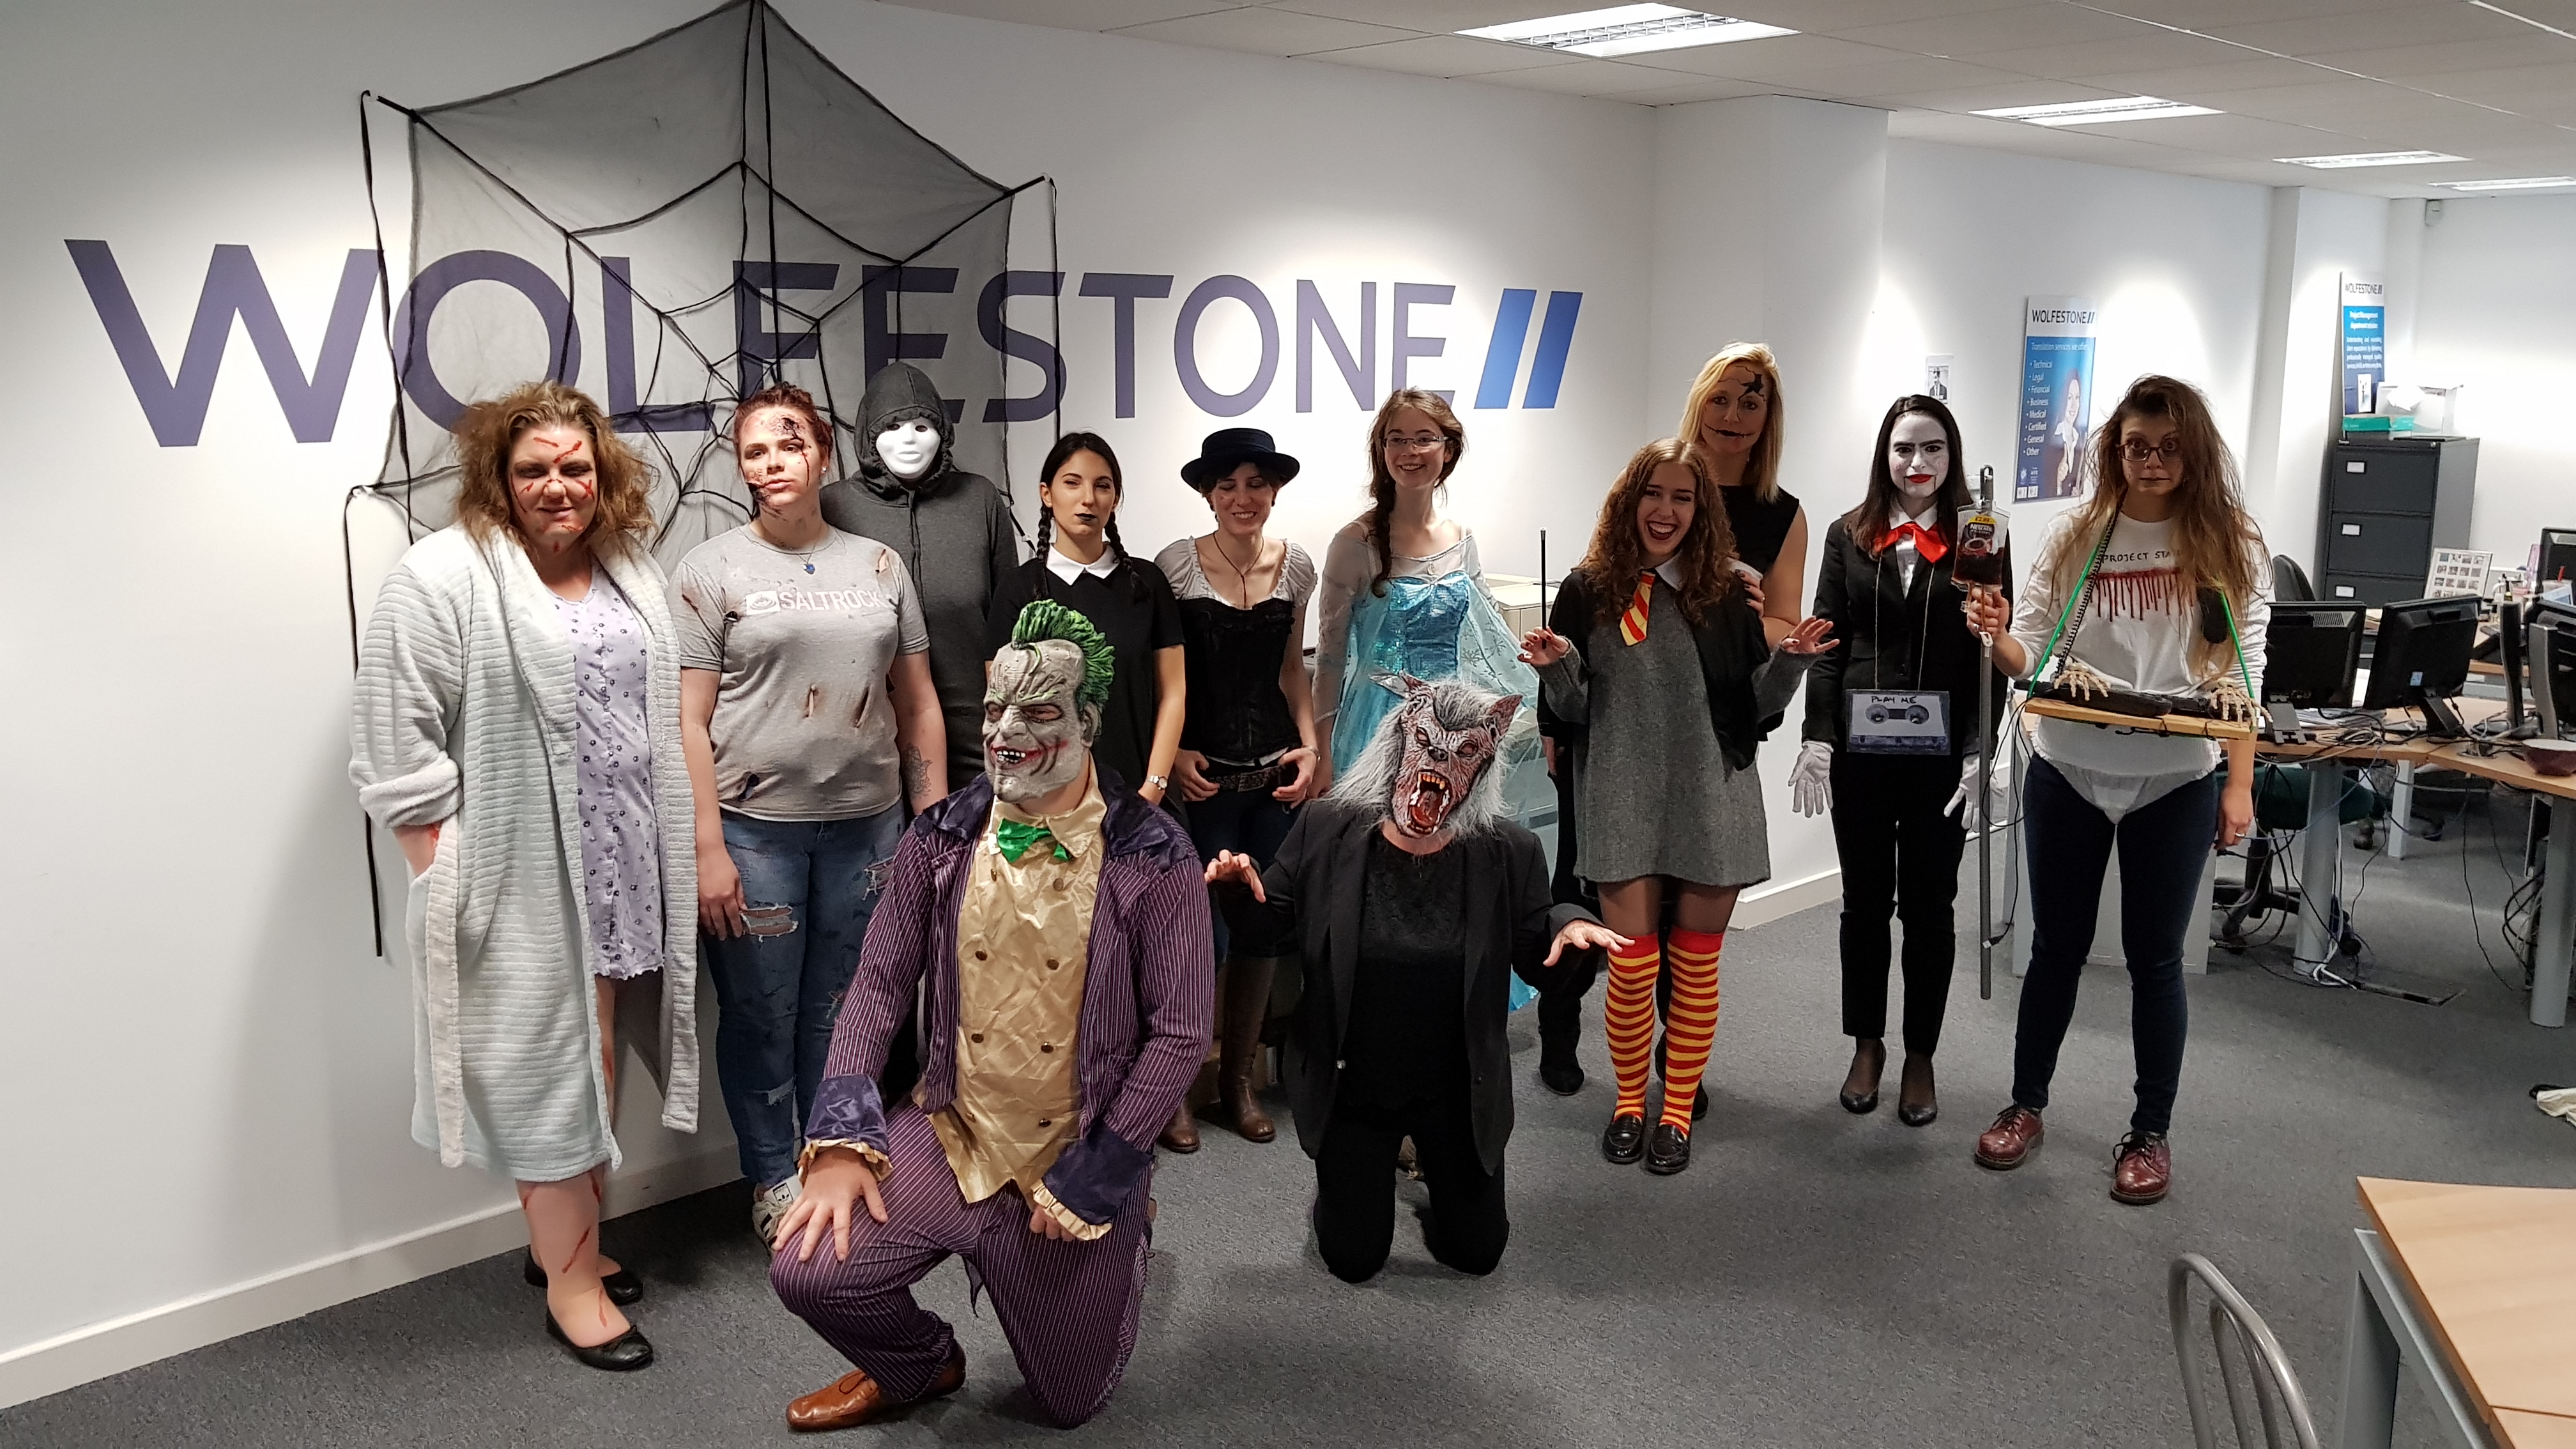 Photograph of Wolfestone employees in their Halloween costumes.